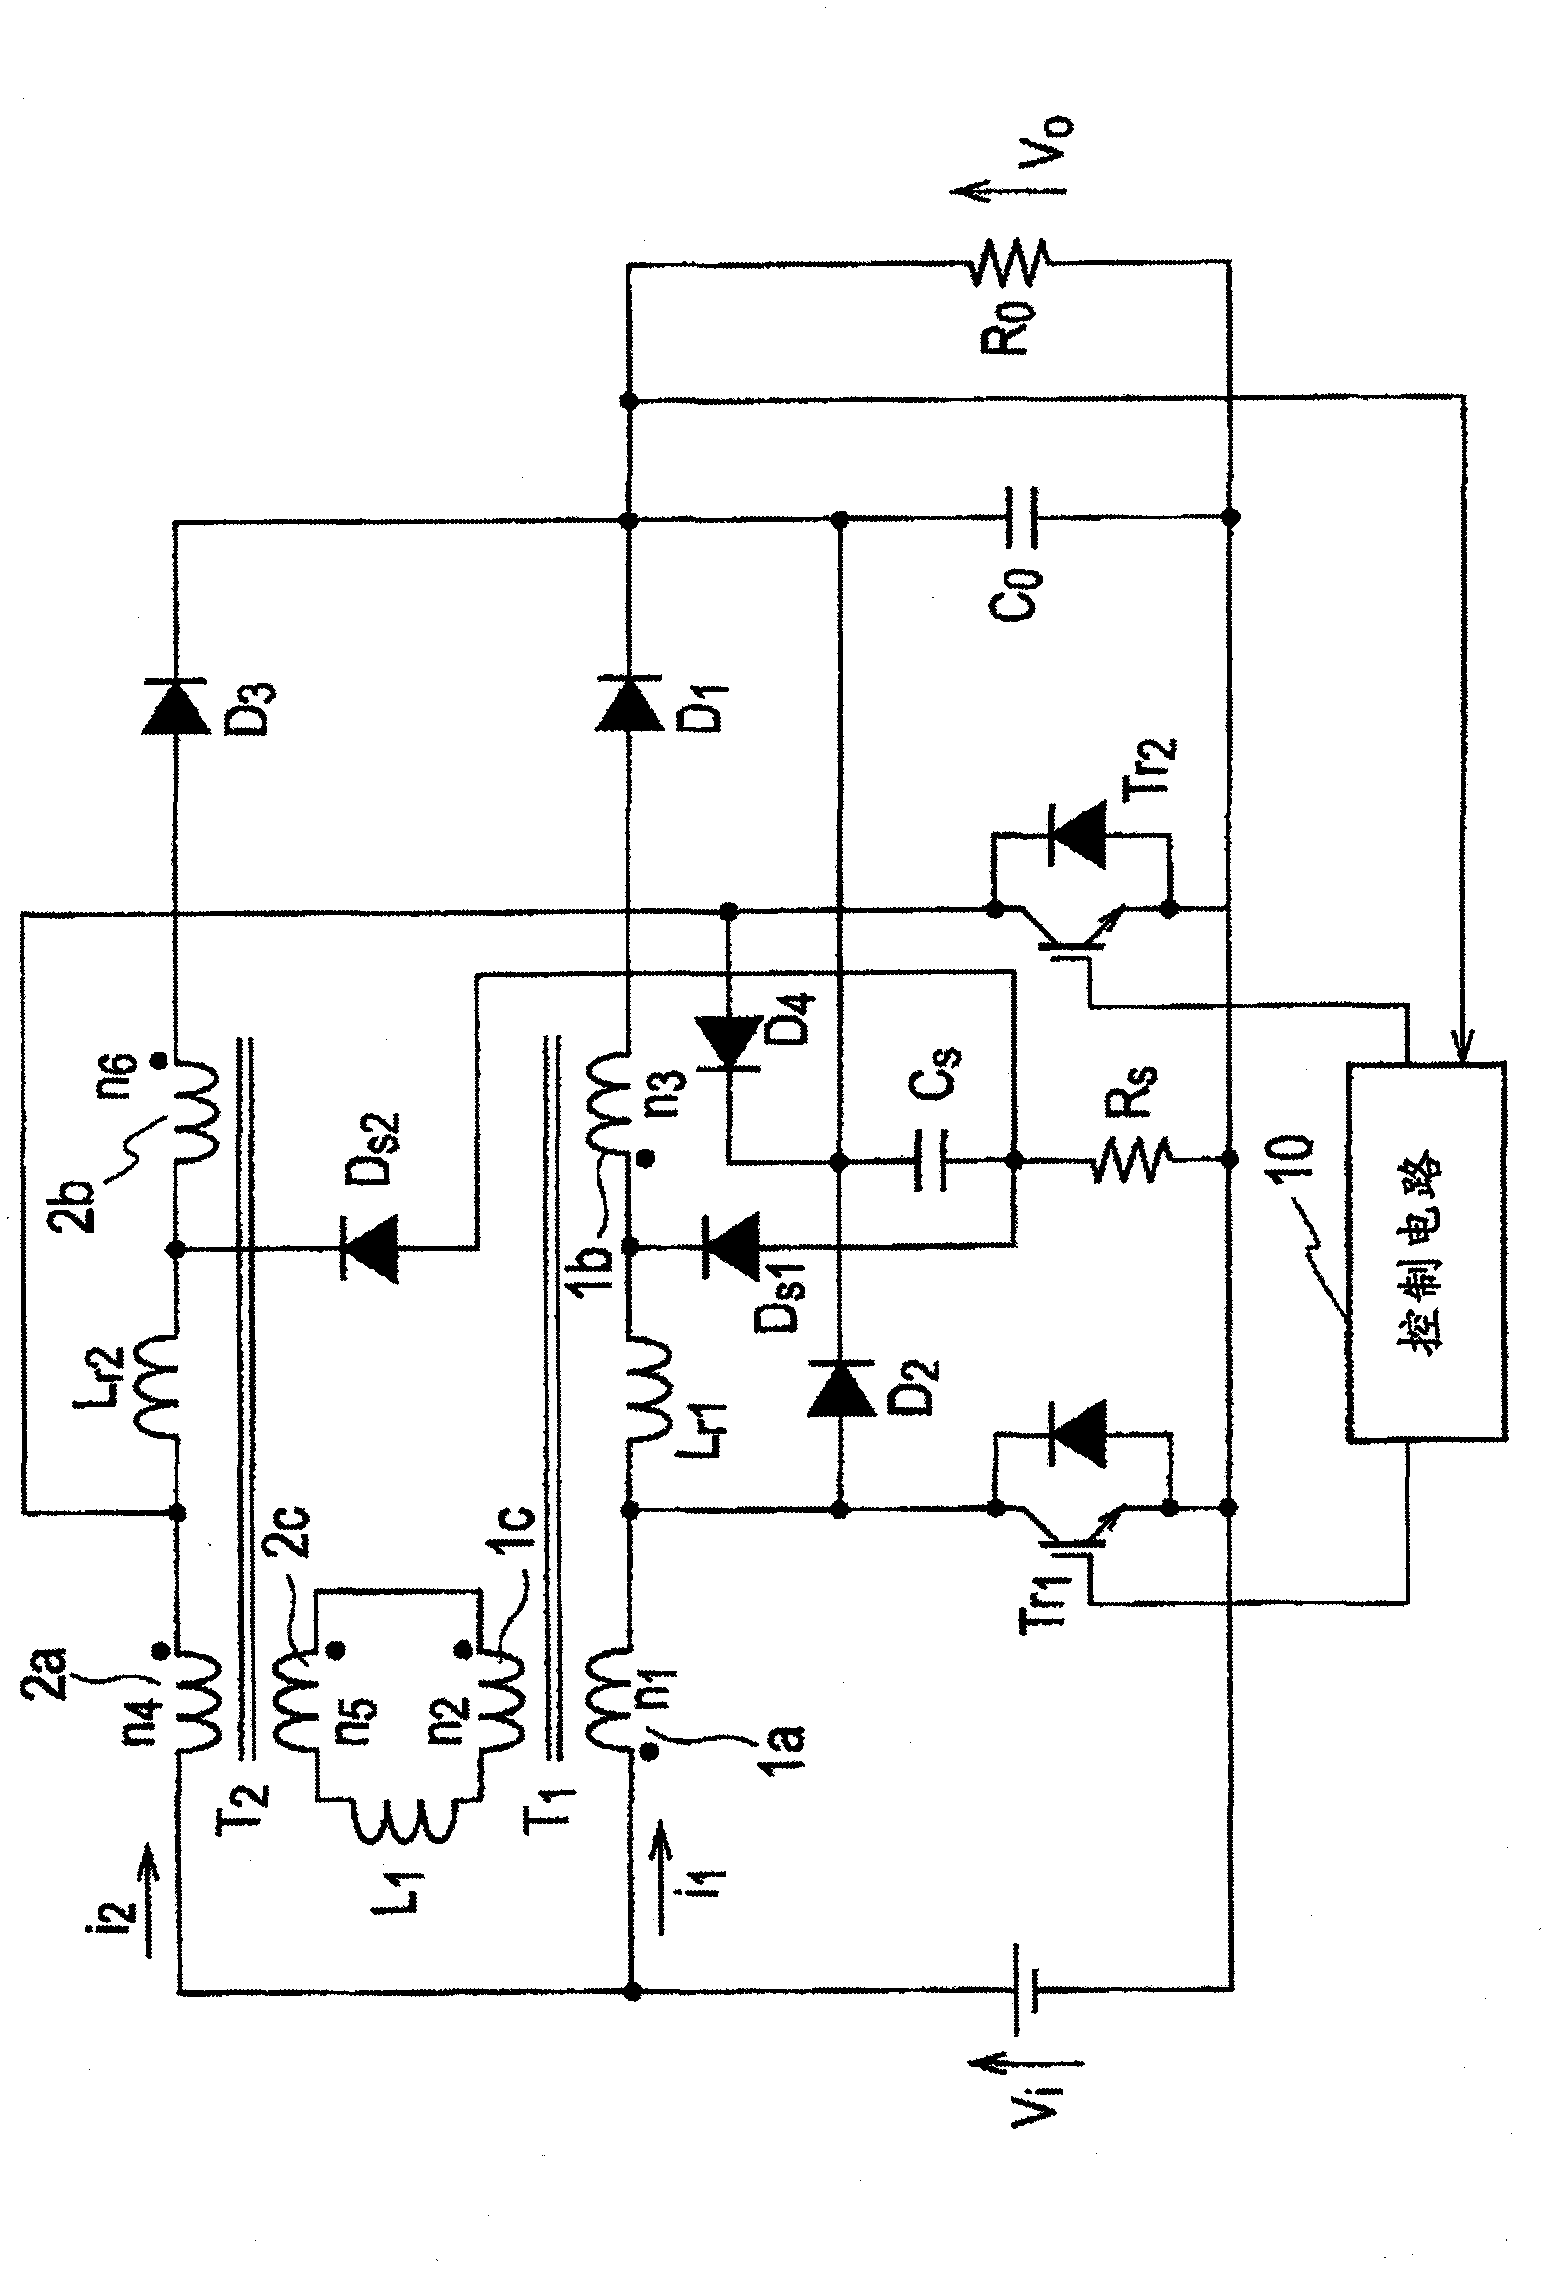 DC-DC converter with snubber circuit